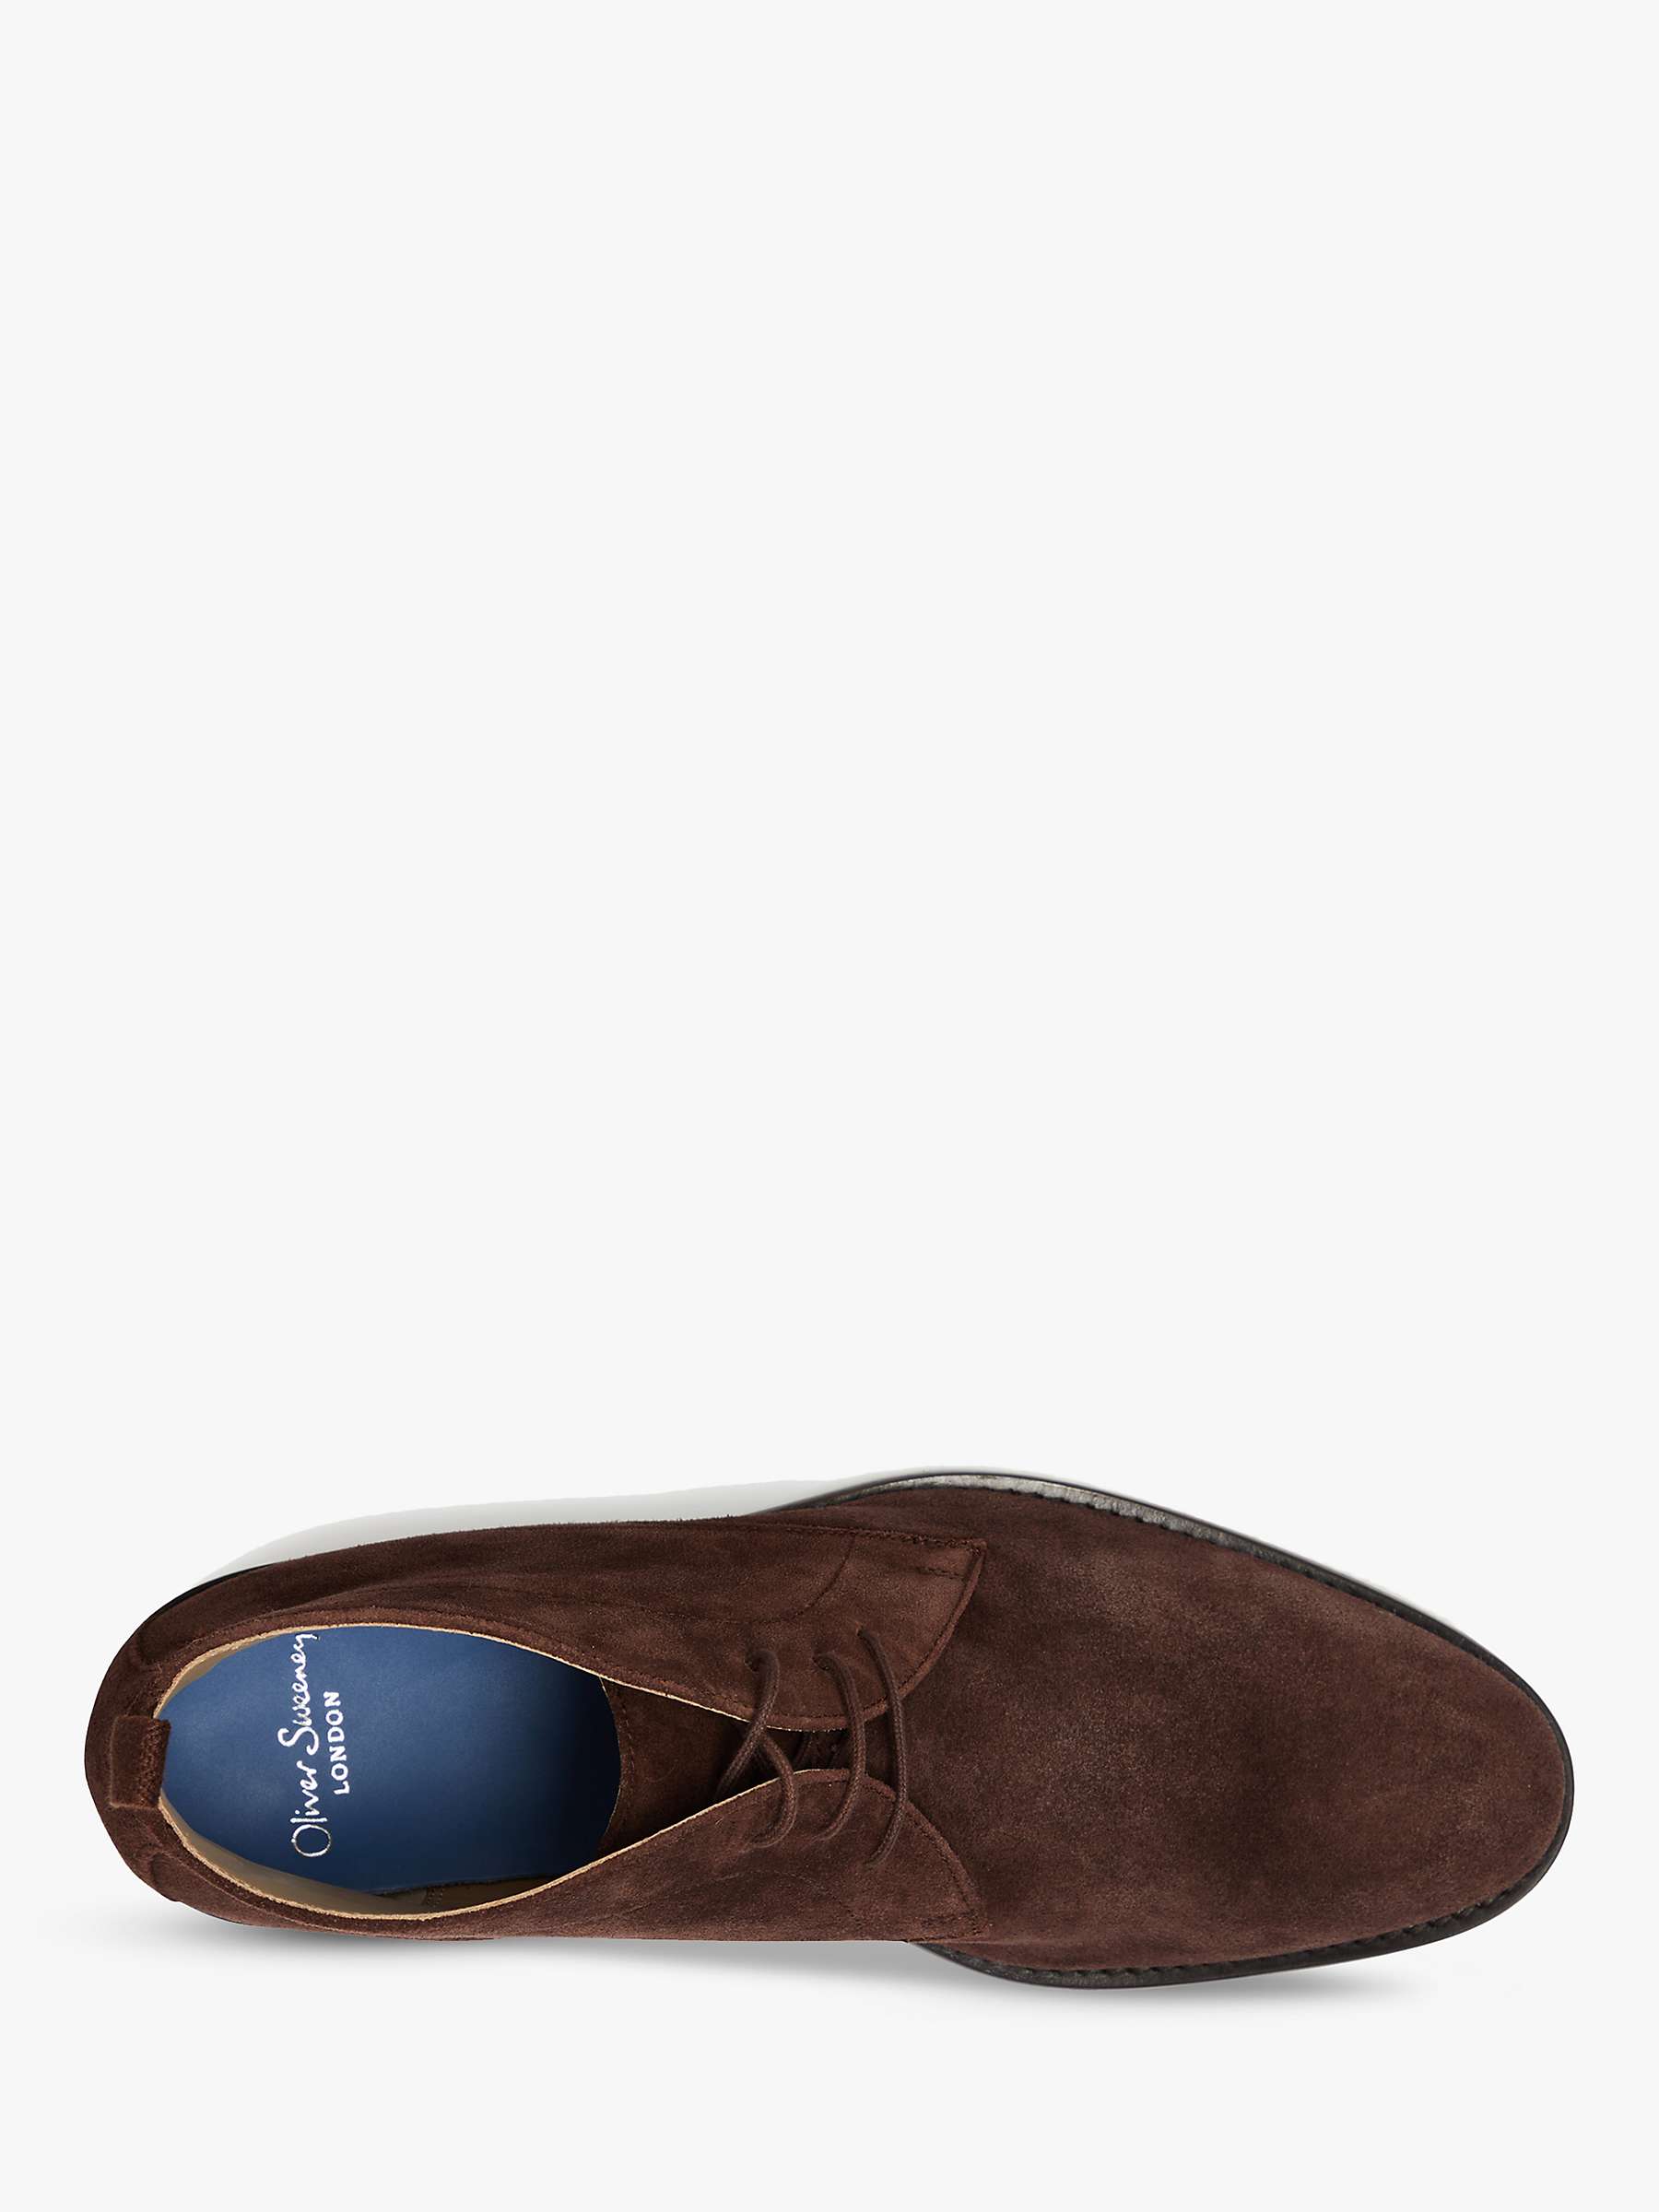 Buy Oliver Sweeney Farleton Suede Chukka Boots, Chocolate Online at johnlewis.com